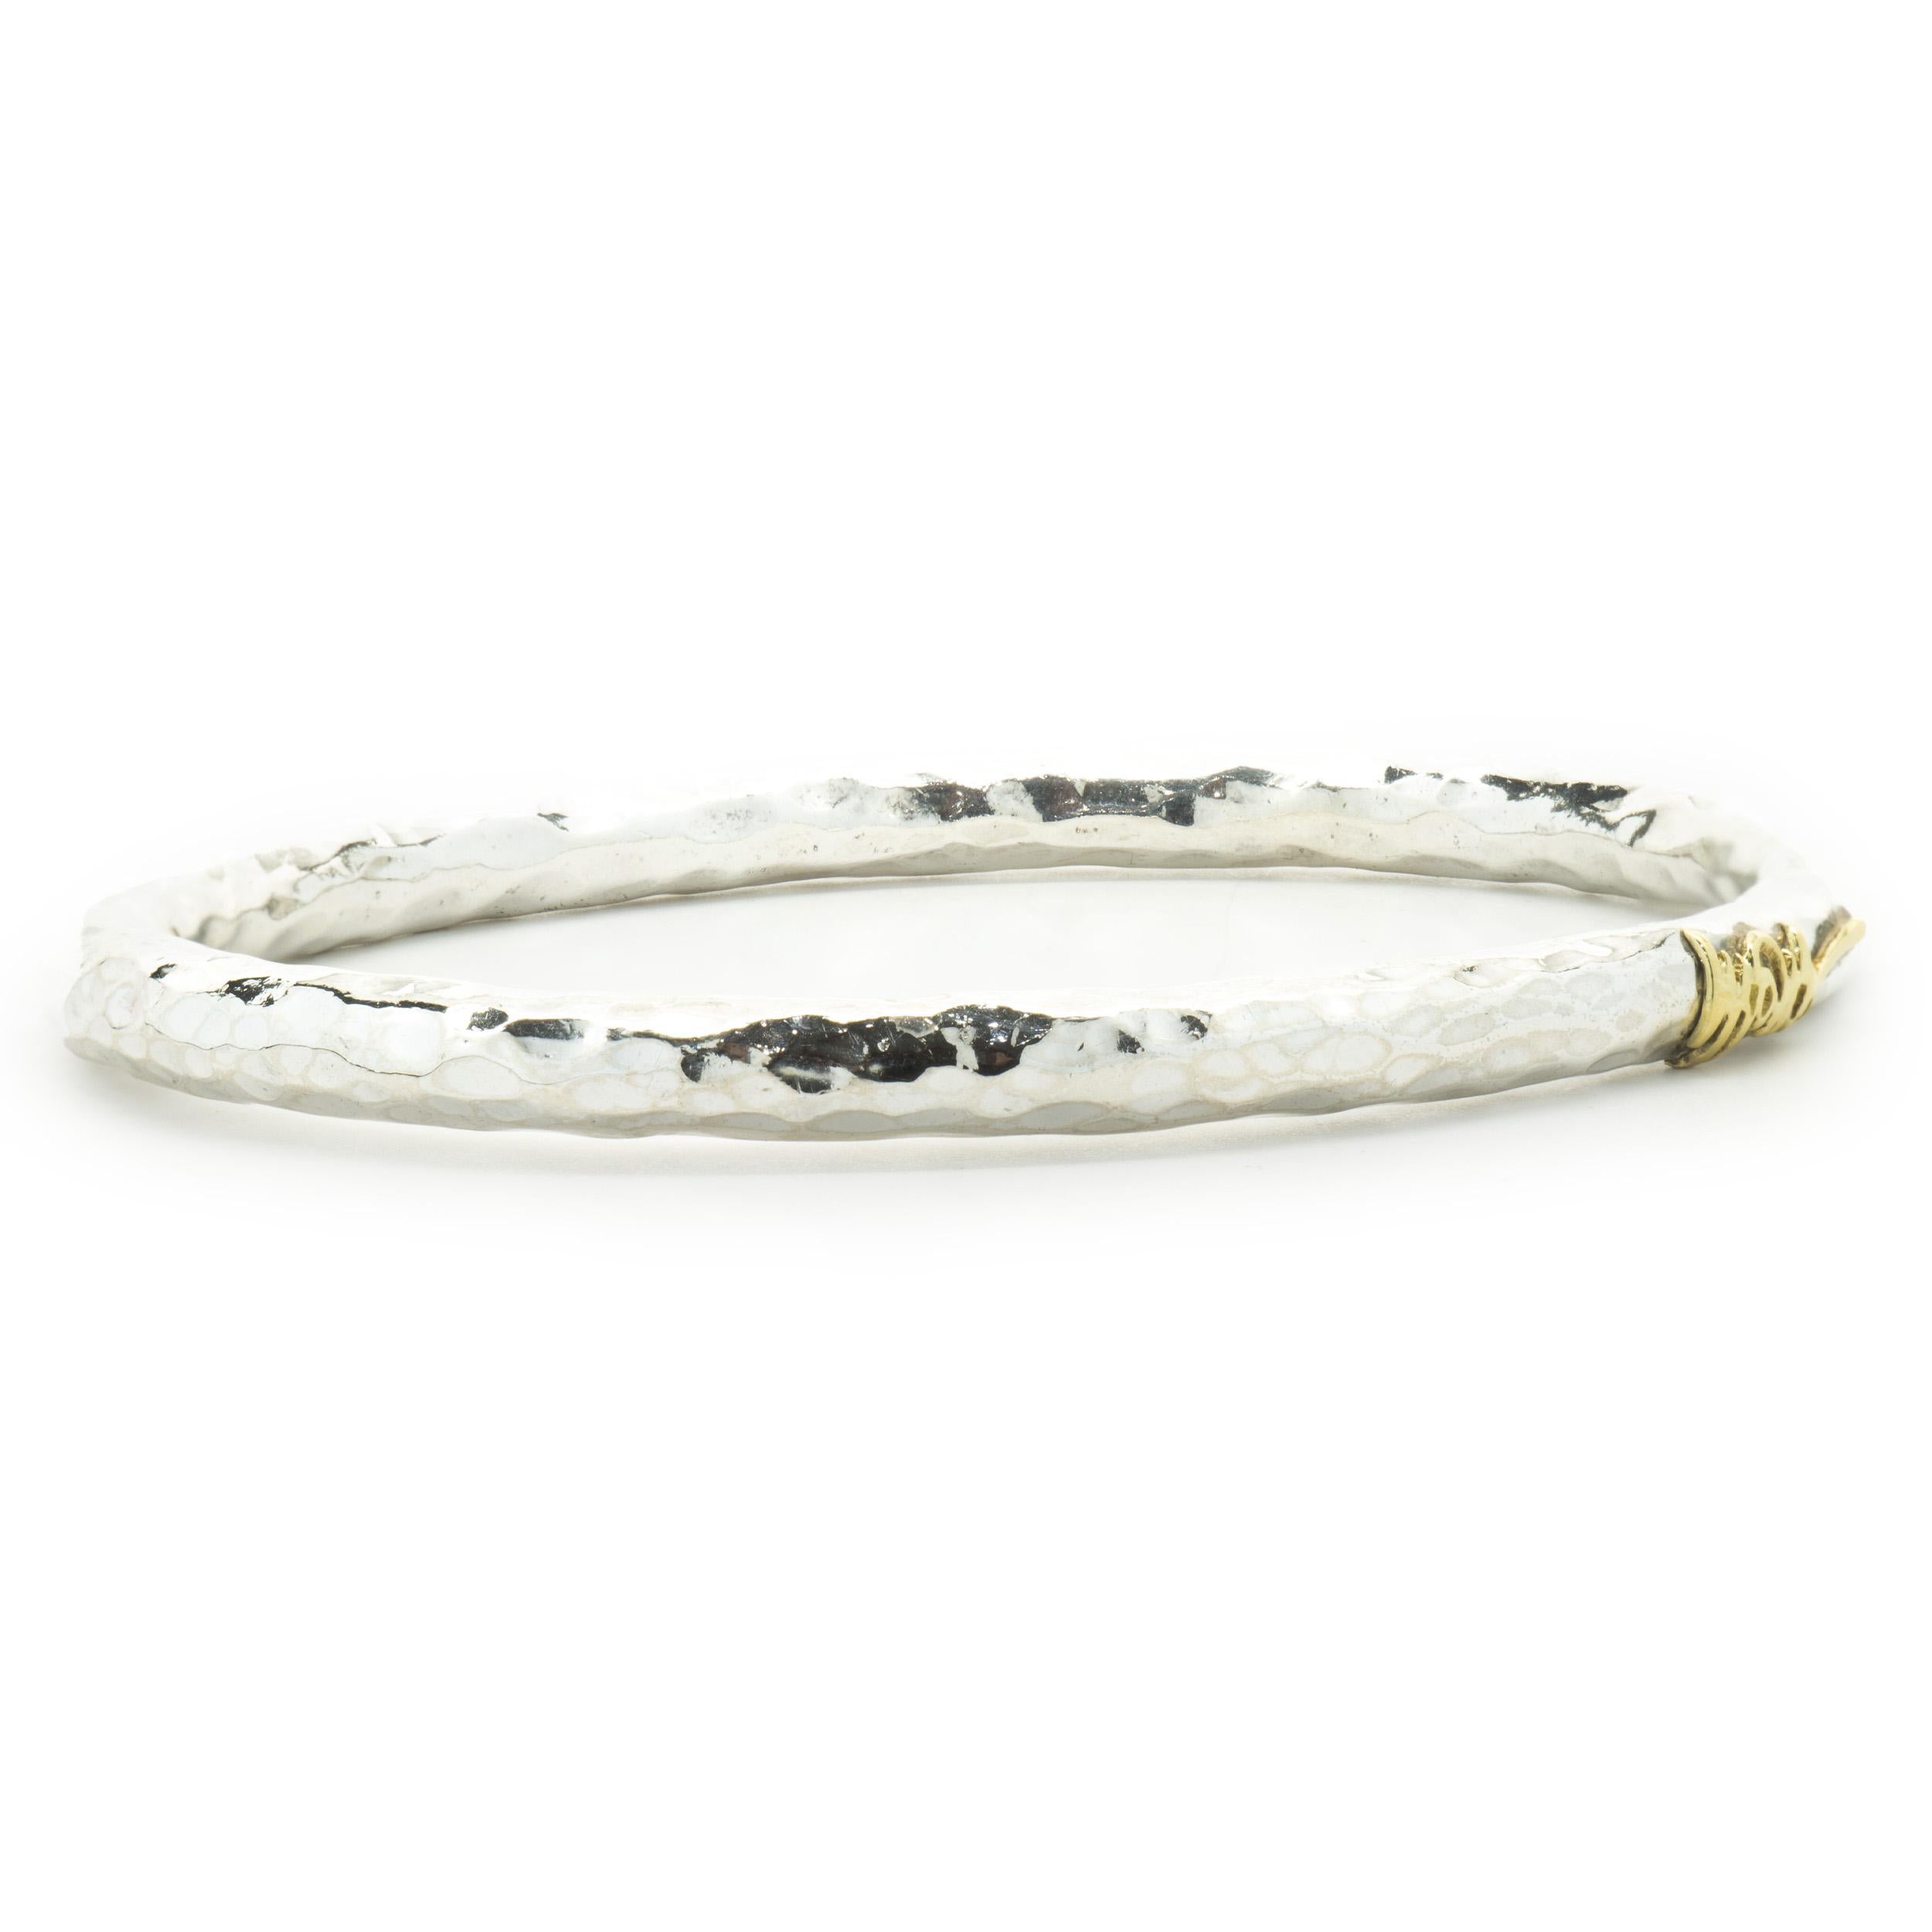 Designer: Ippolita
Material: sterling silver & 18K yellow gold
Dimensions: bracelet will fit up to a 7.5-inch wrist
Weight: 50.65 grams
